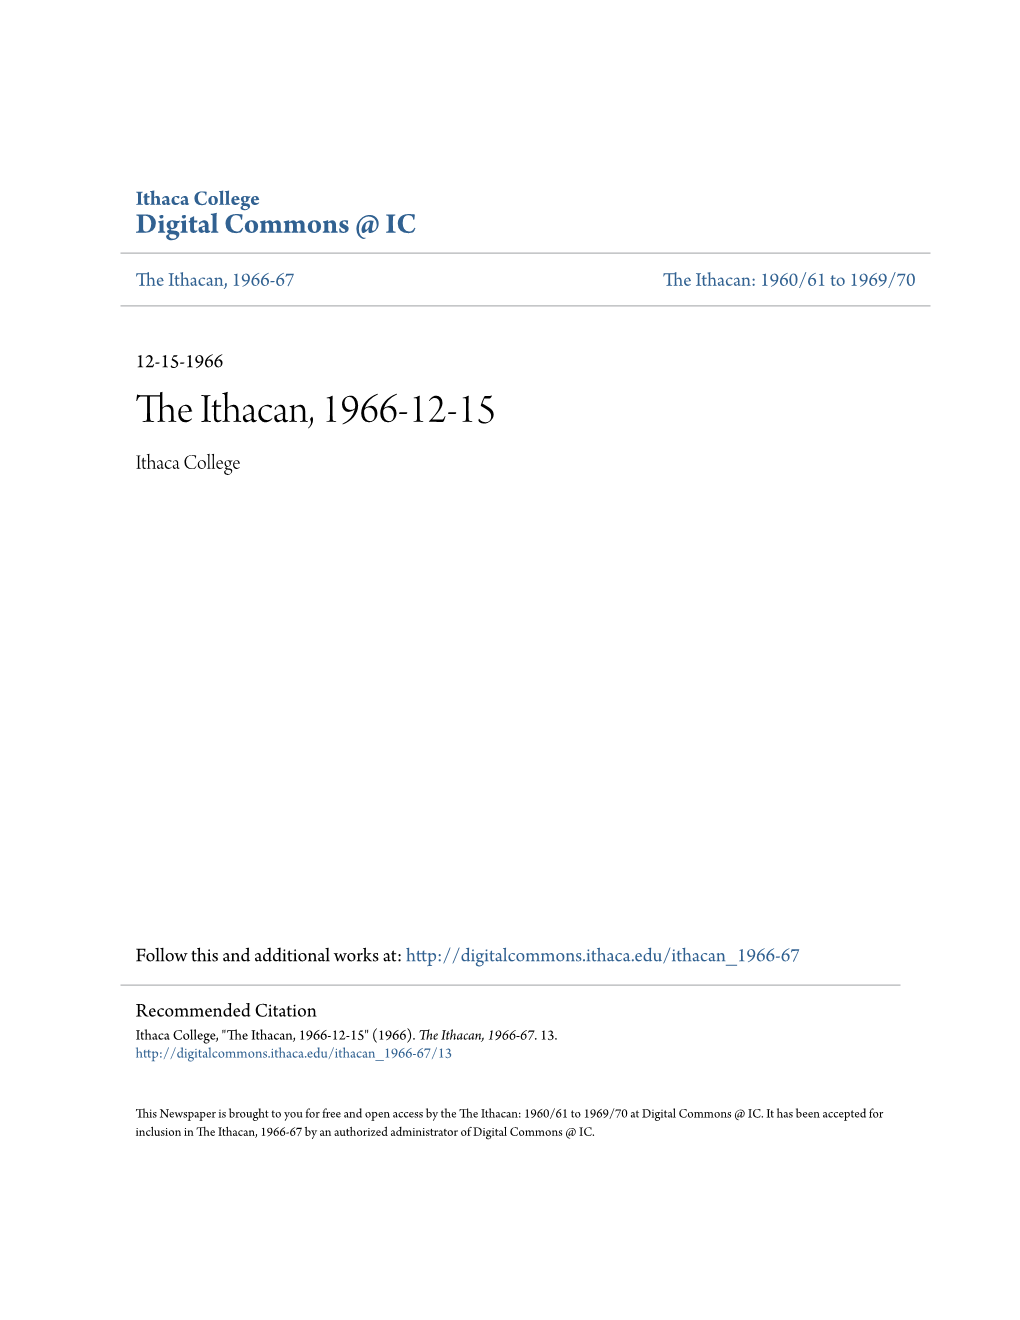 The Ithacan, 1966-12-15